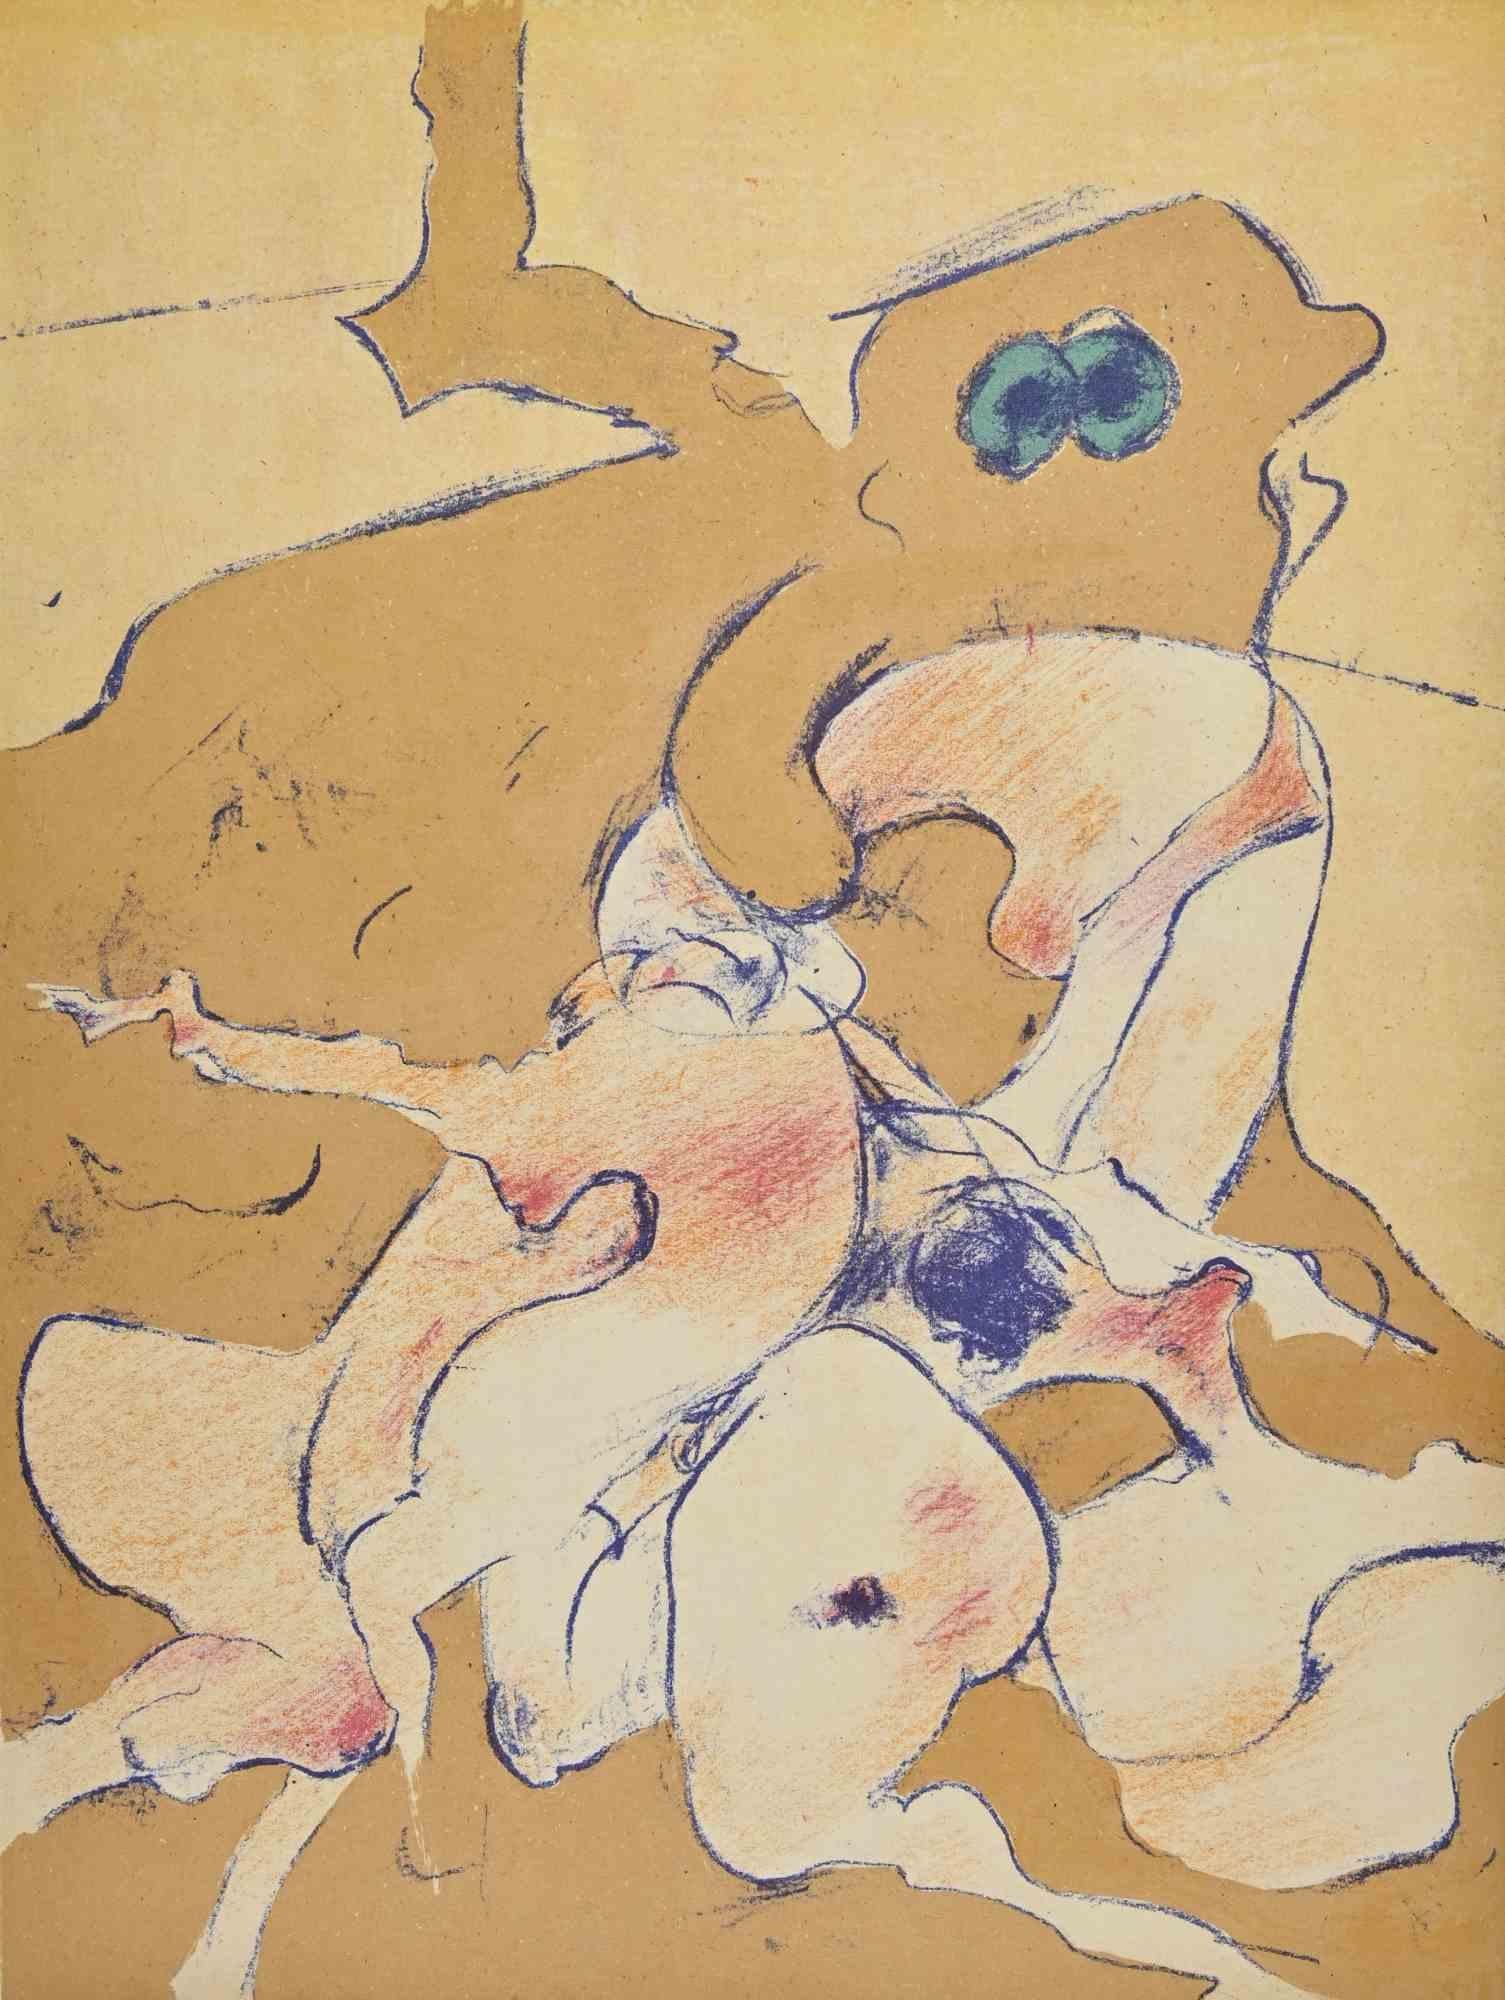 Untitled  is an artwork realized by Dorothea Tanning  in 1974.

Colored lithograph.

Good conditions. Printed by  Atelier Pierre Chave in Vence, France.

This lithograph was realized  by the artist in 1974 for éditions XXe Siècle - Le Surrealisme I